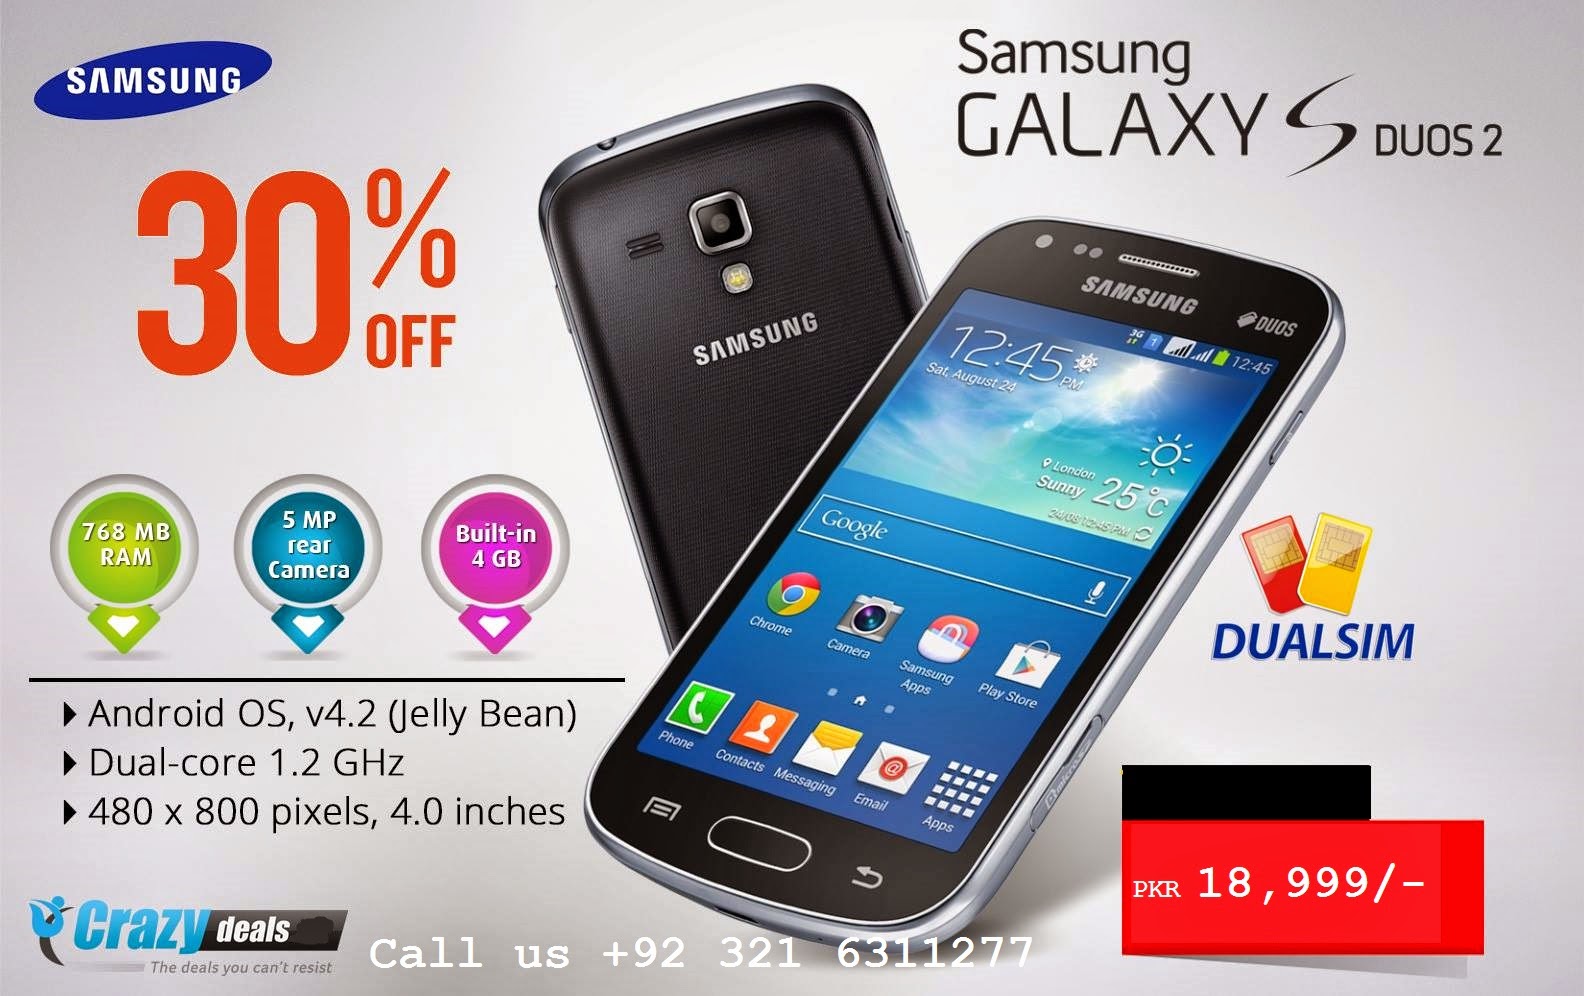 Samsung Galaxy S Duos 2 Price in Pakistan - The Deals you can't resist